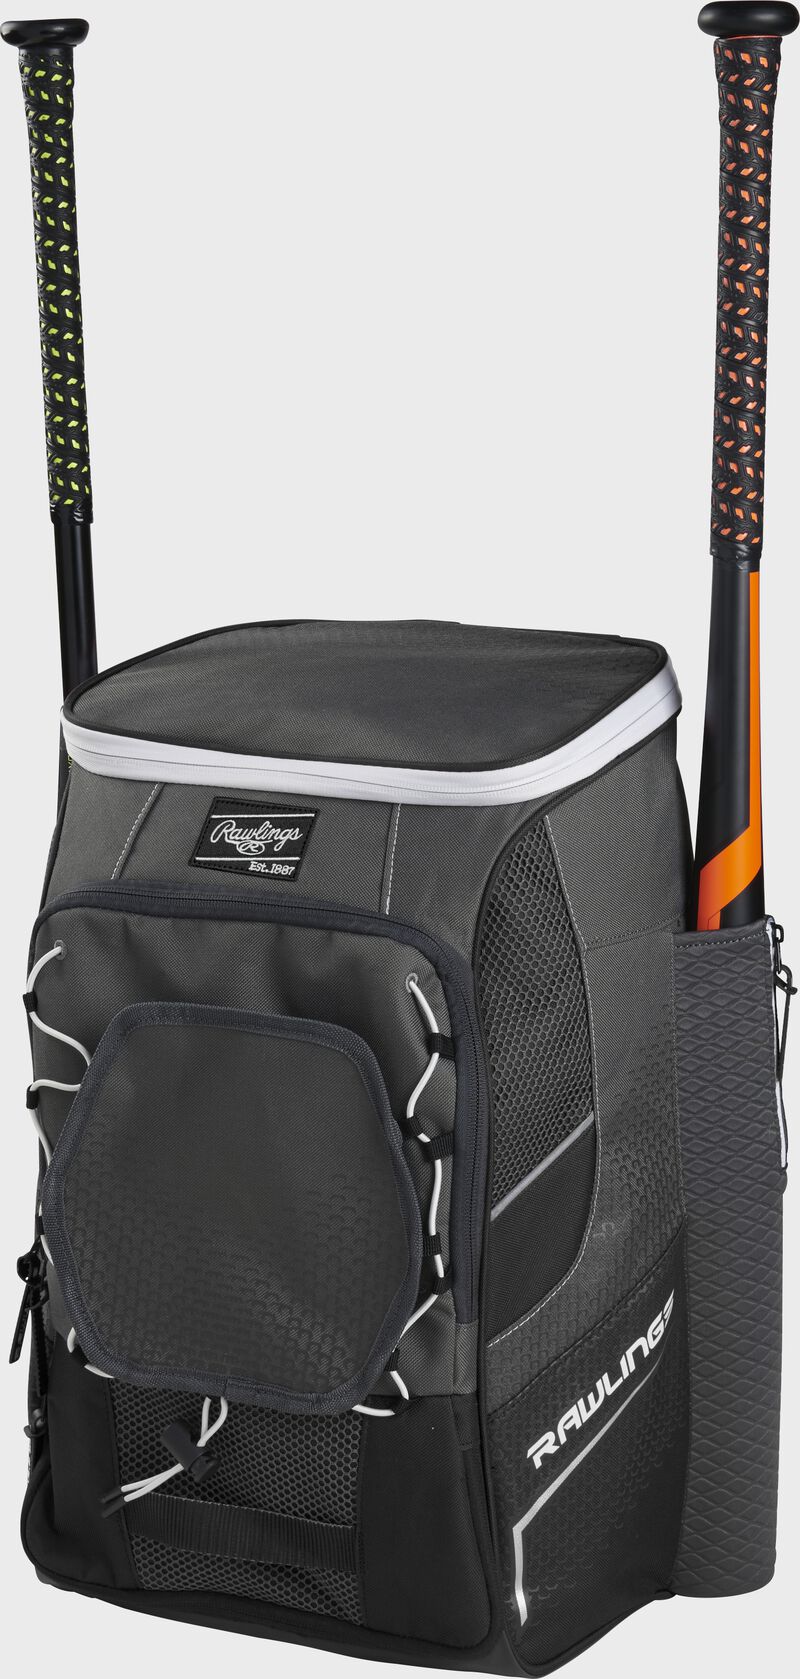 Front right angle view of a black Impulse backpack with two bats in the side sleeves - SKU: IMPLSE-B loading=